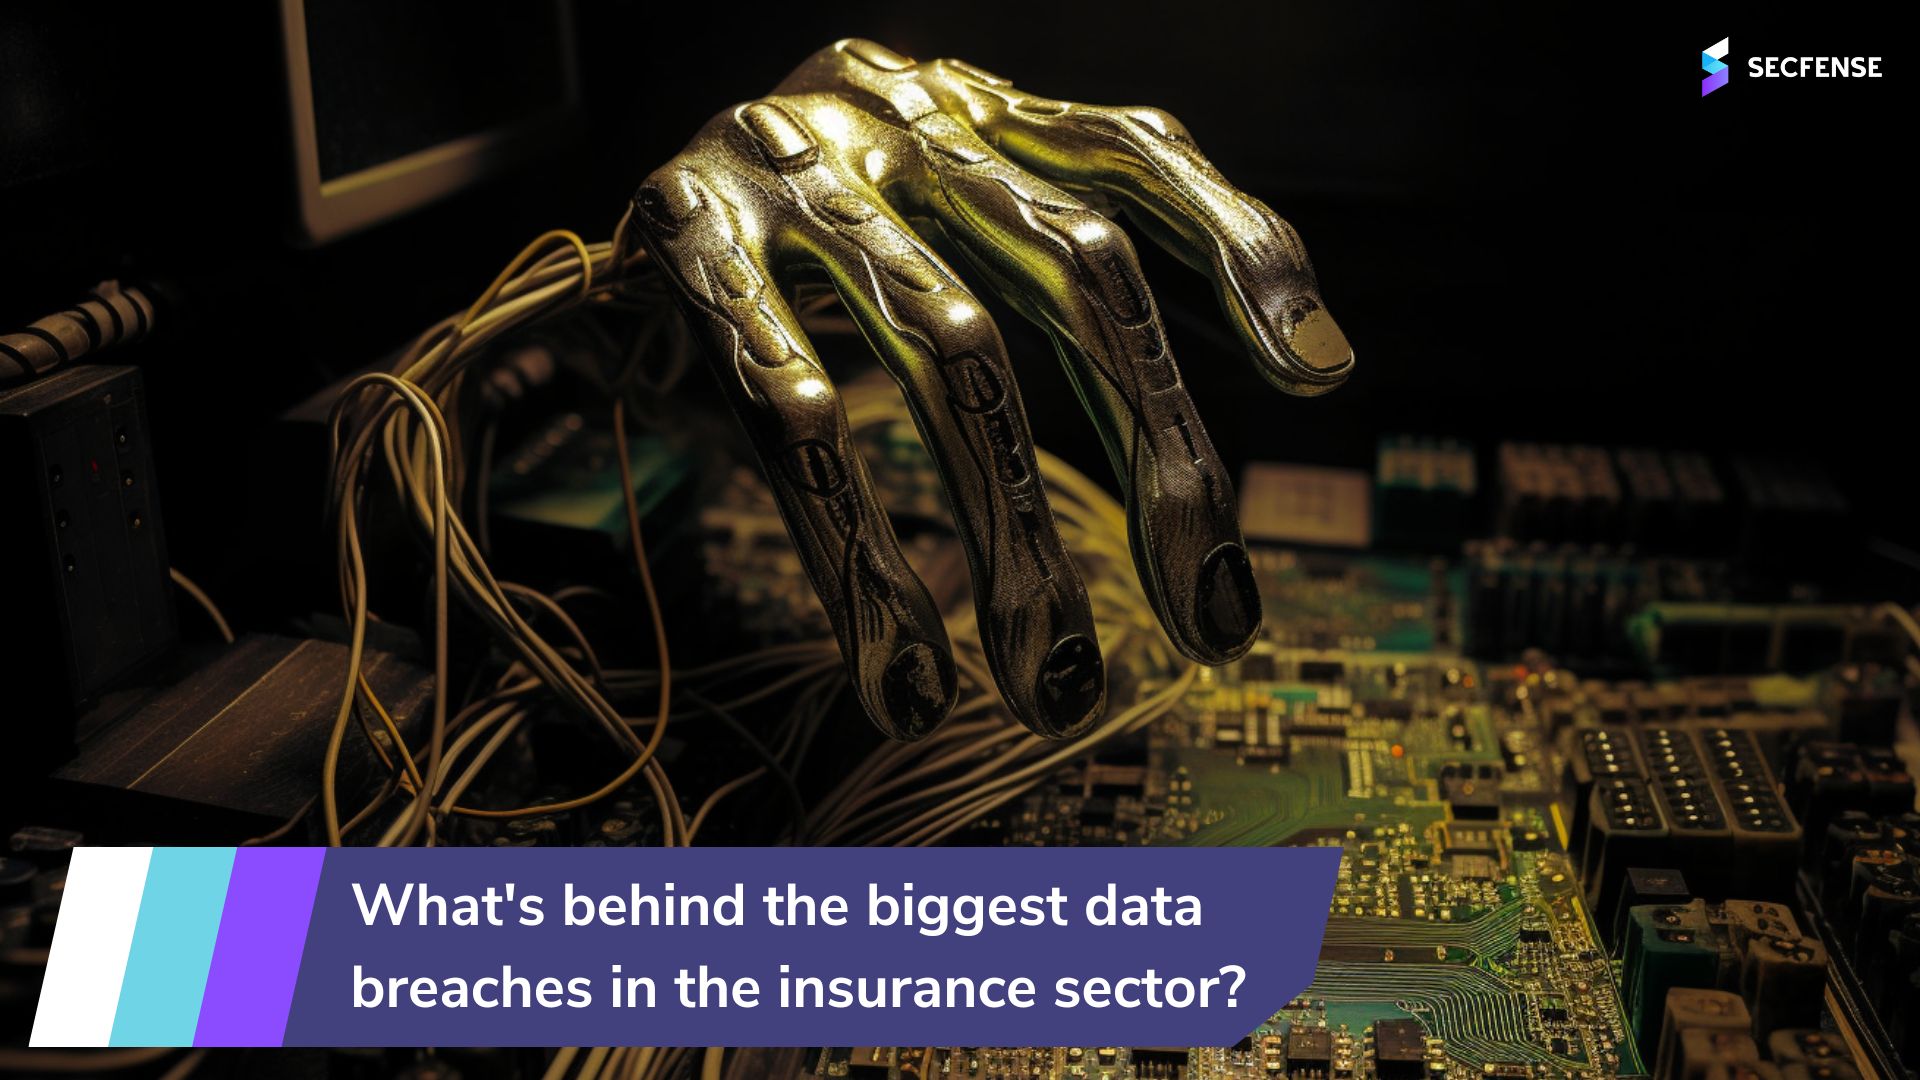 Secfense lists the biggest data breaches in the insurance sector and their common ingredient